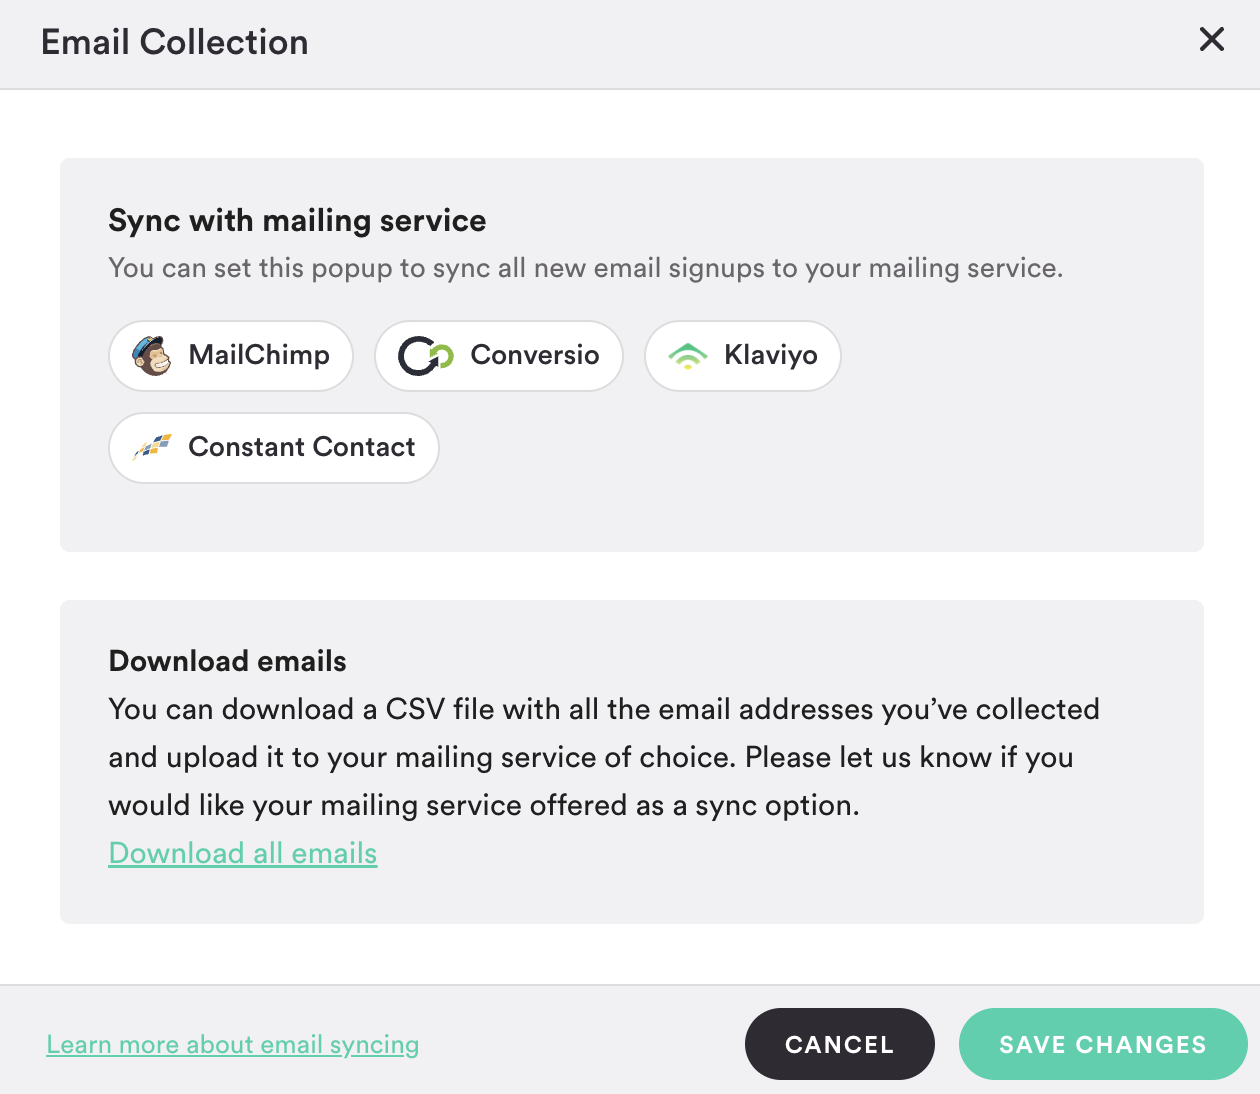 Email Collection settings where a mailing service can be selected.